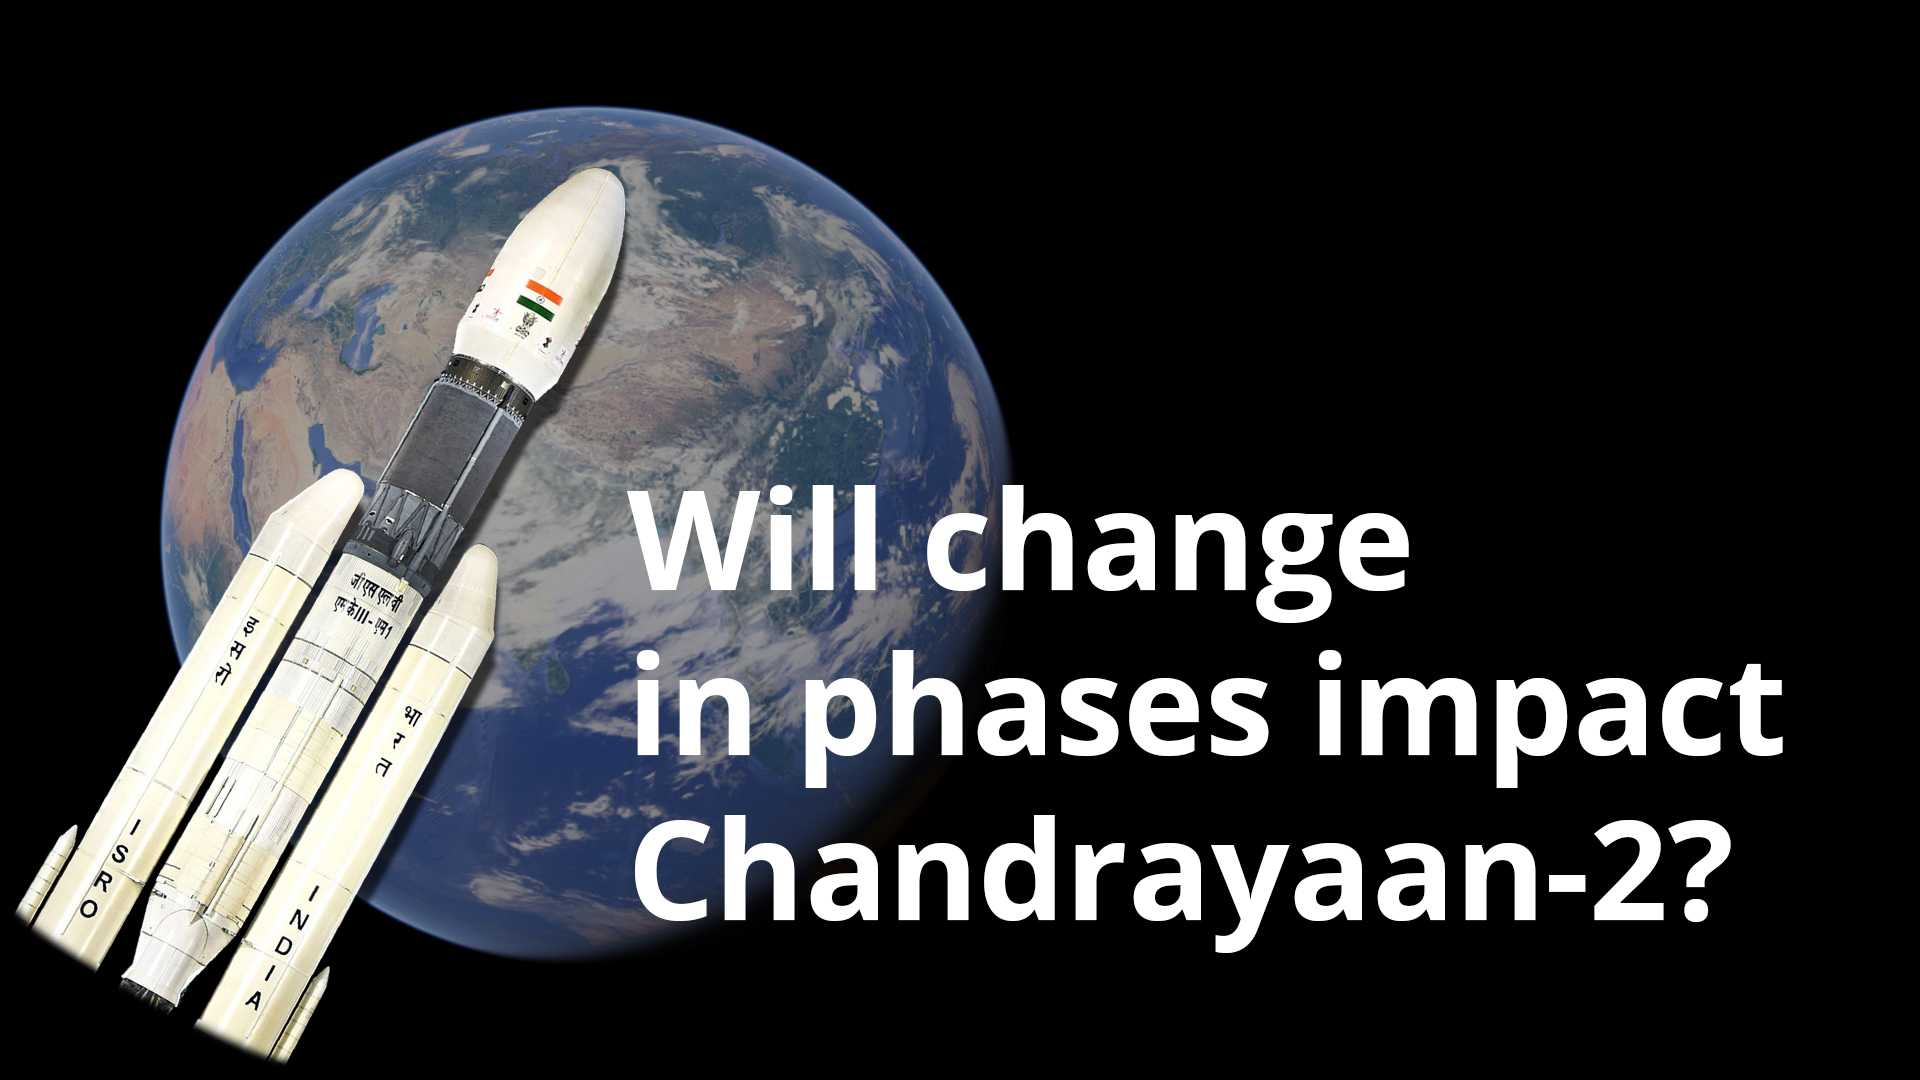 Will change in phases of Chandrayaan-2 impact the mission?